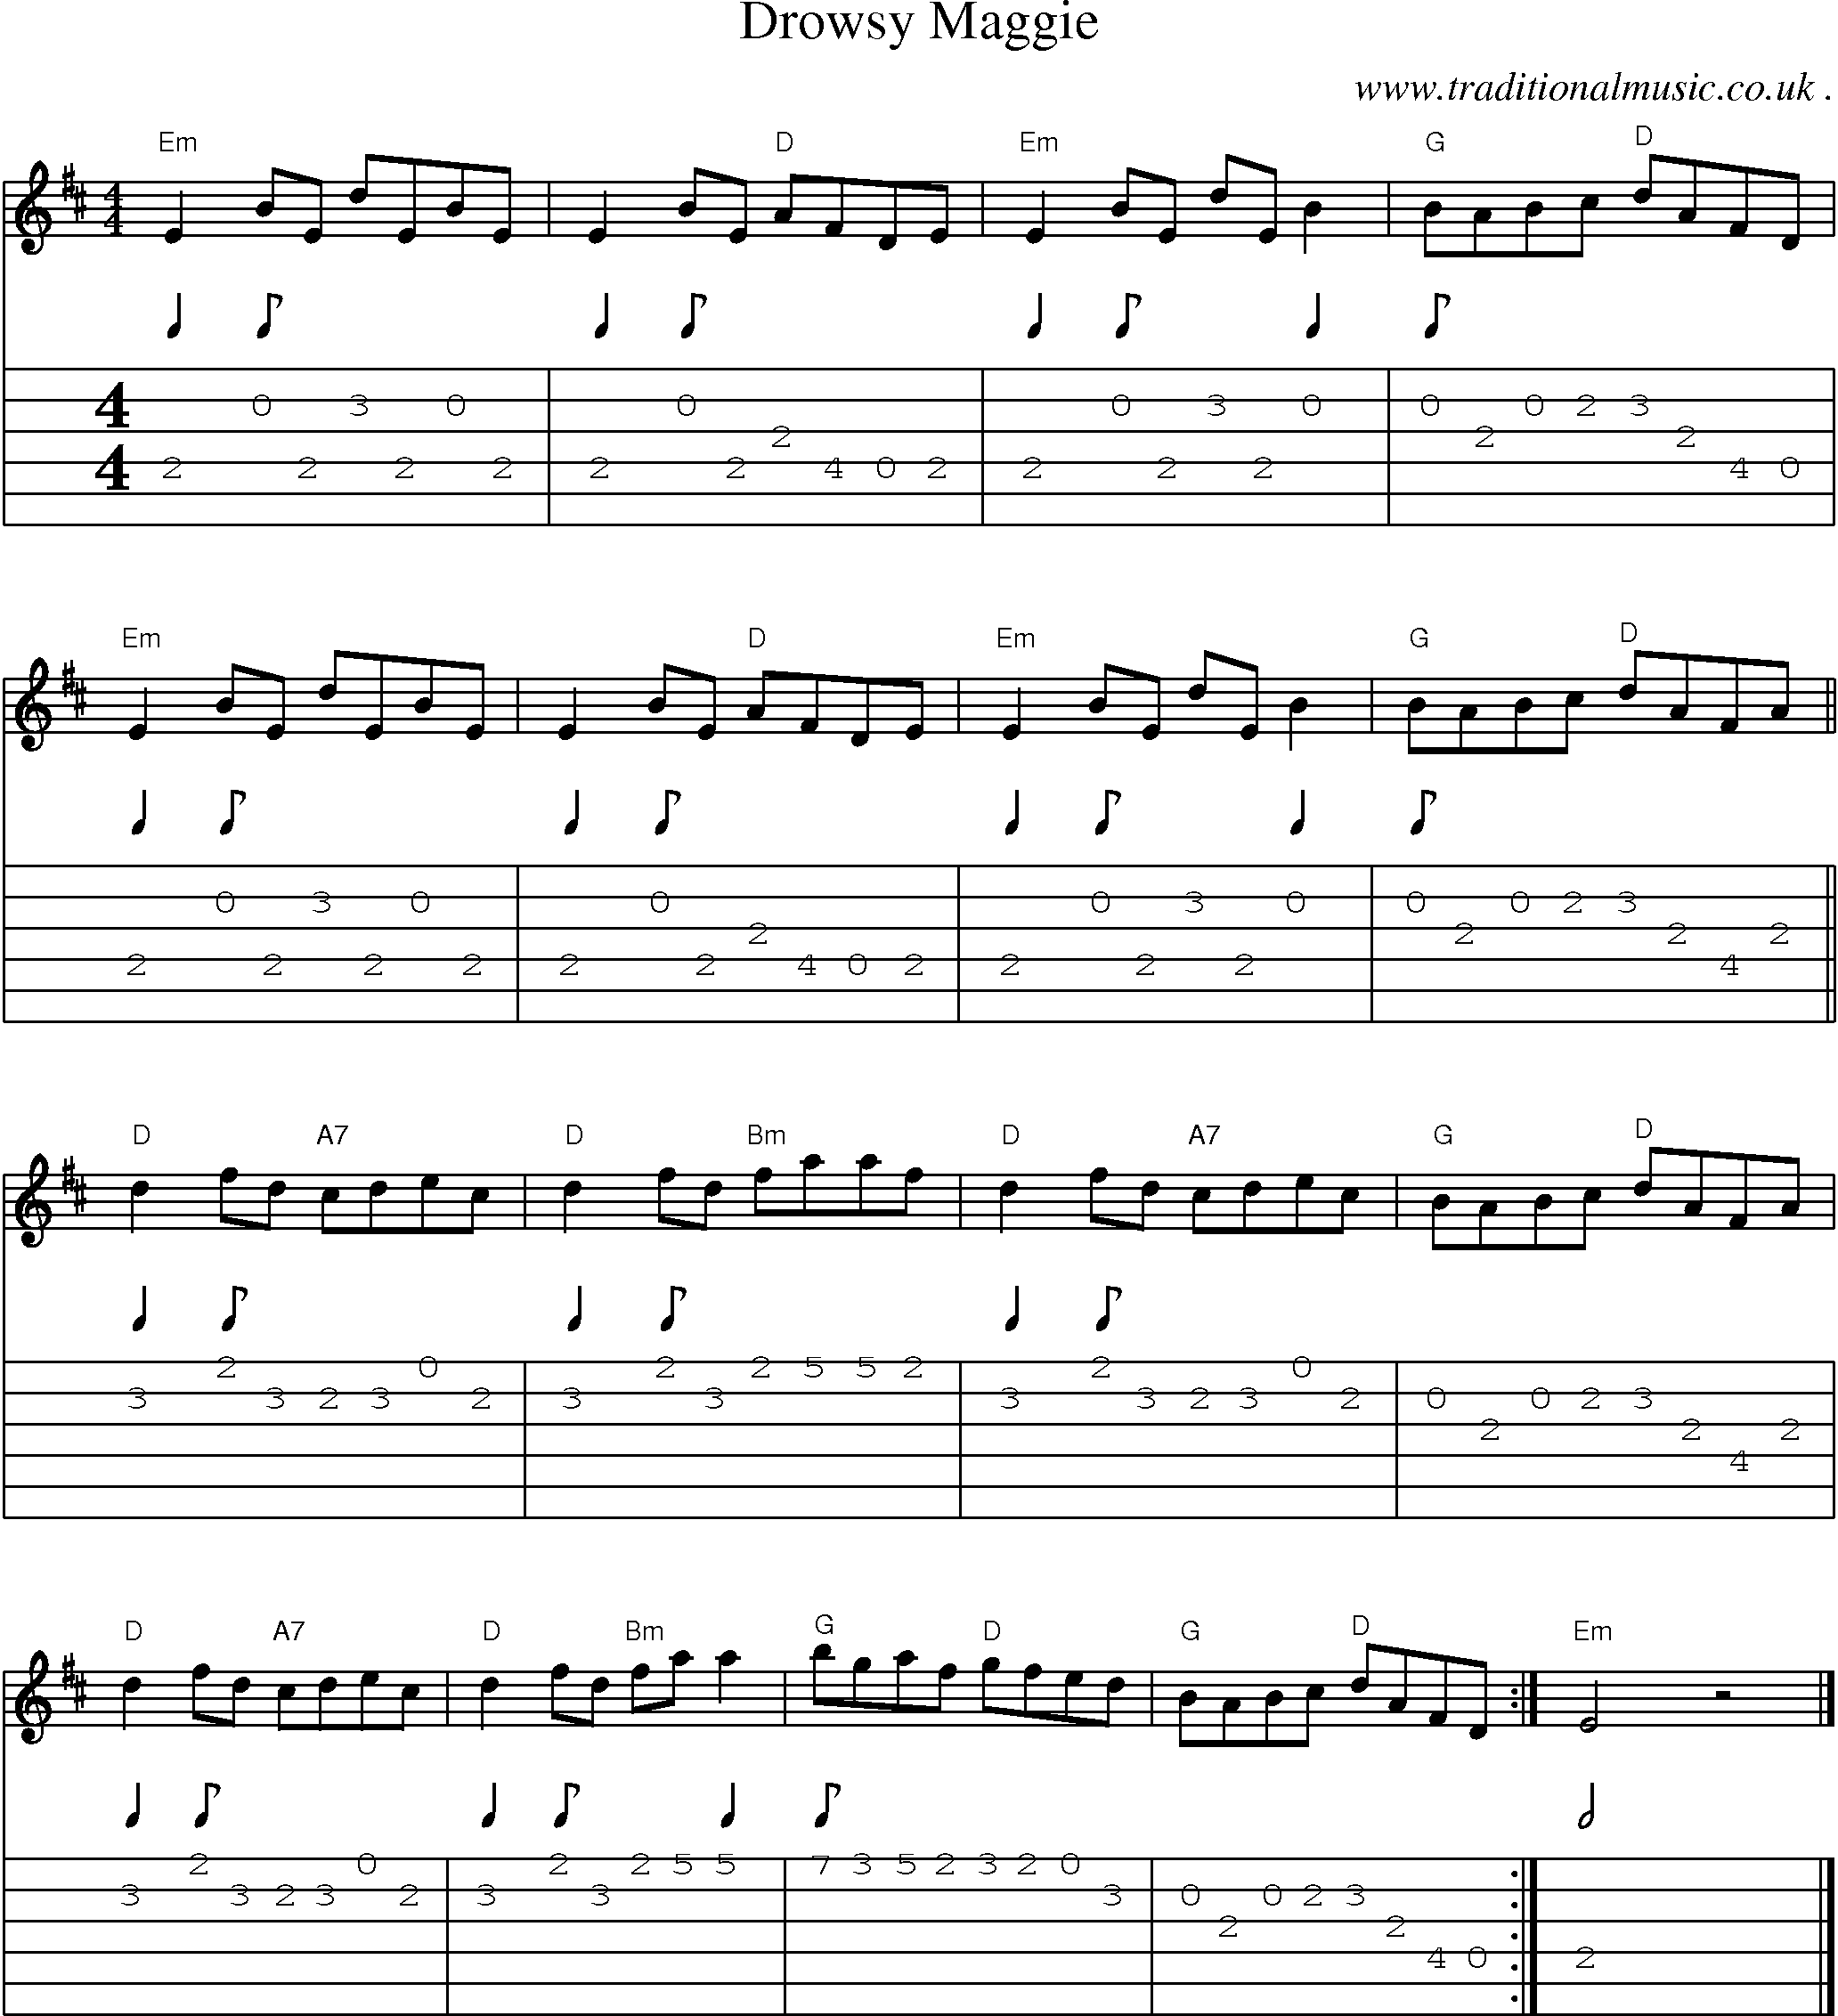 Music Score and Guitar Tabs for Drowsy Maggie